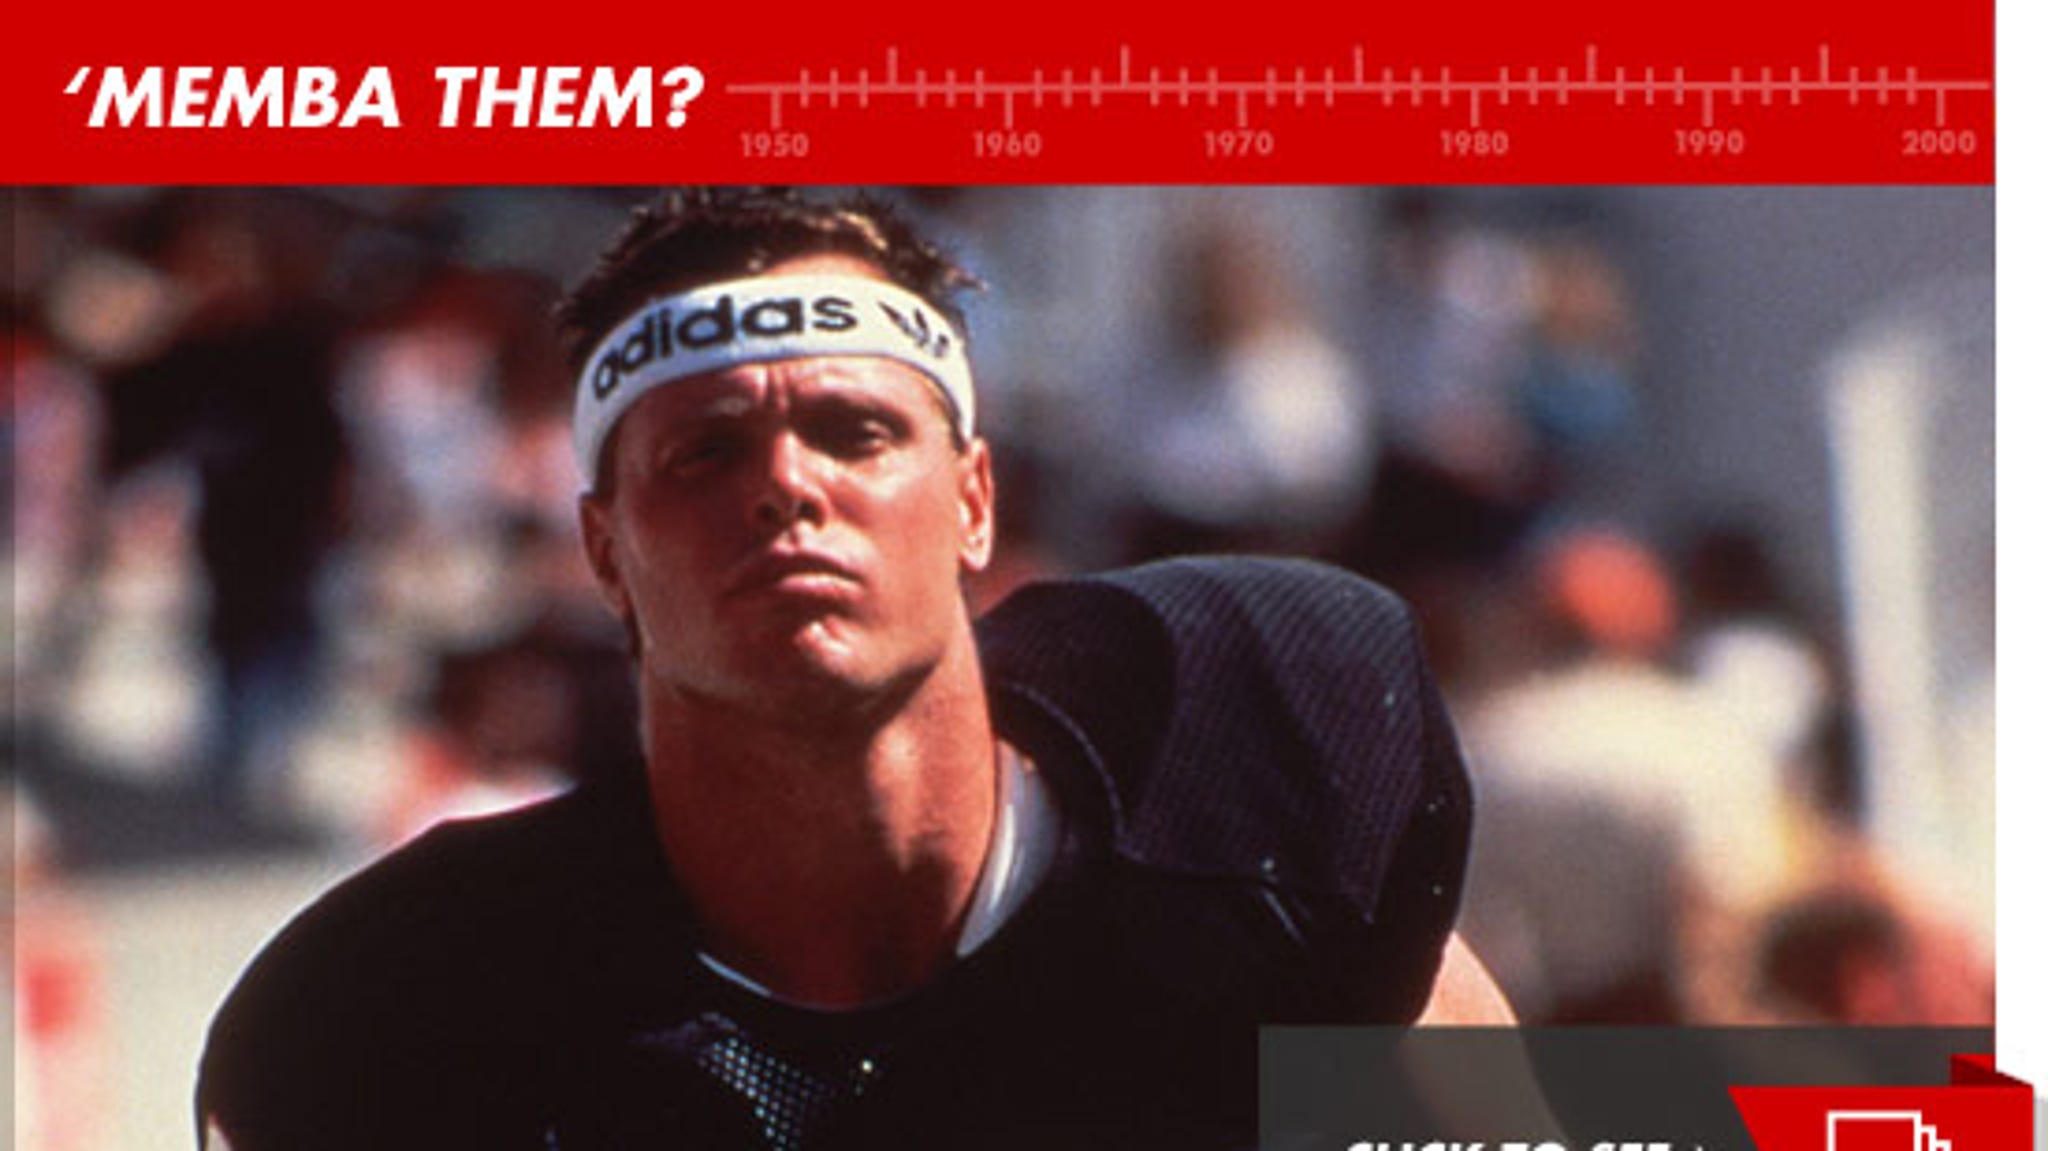 Jim McMahon was a two-time all-American quarterback and Super Bowl champ du...